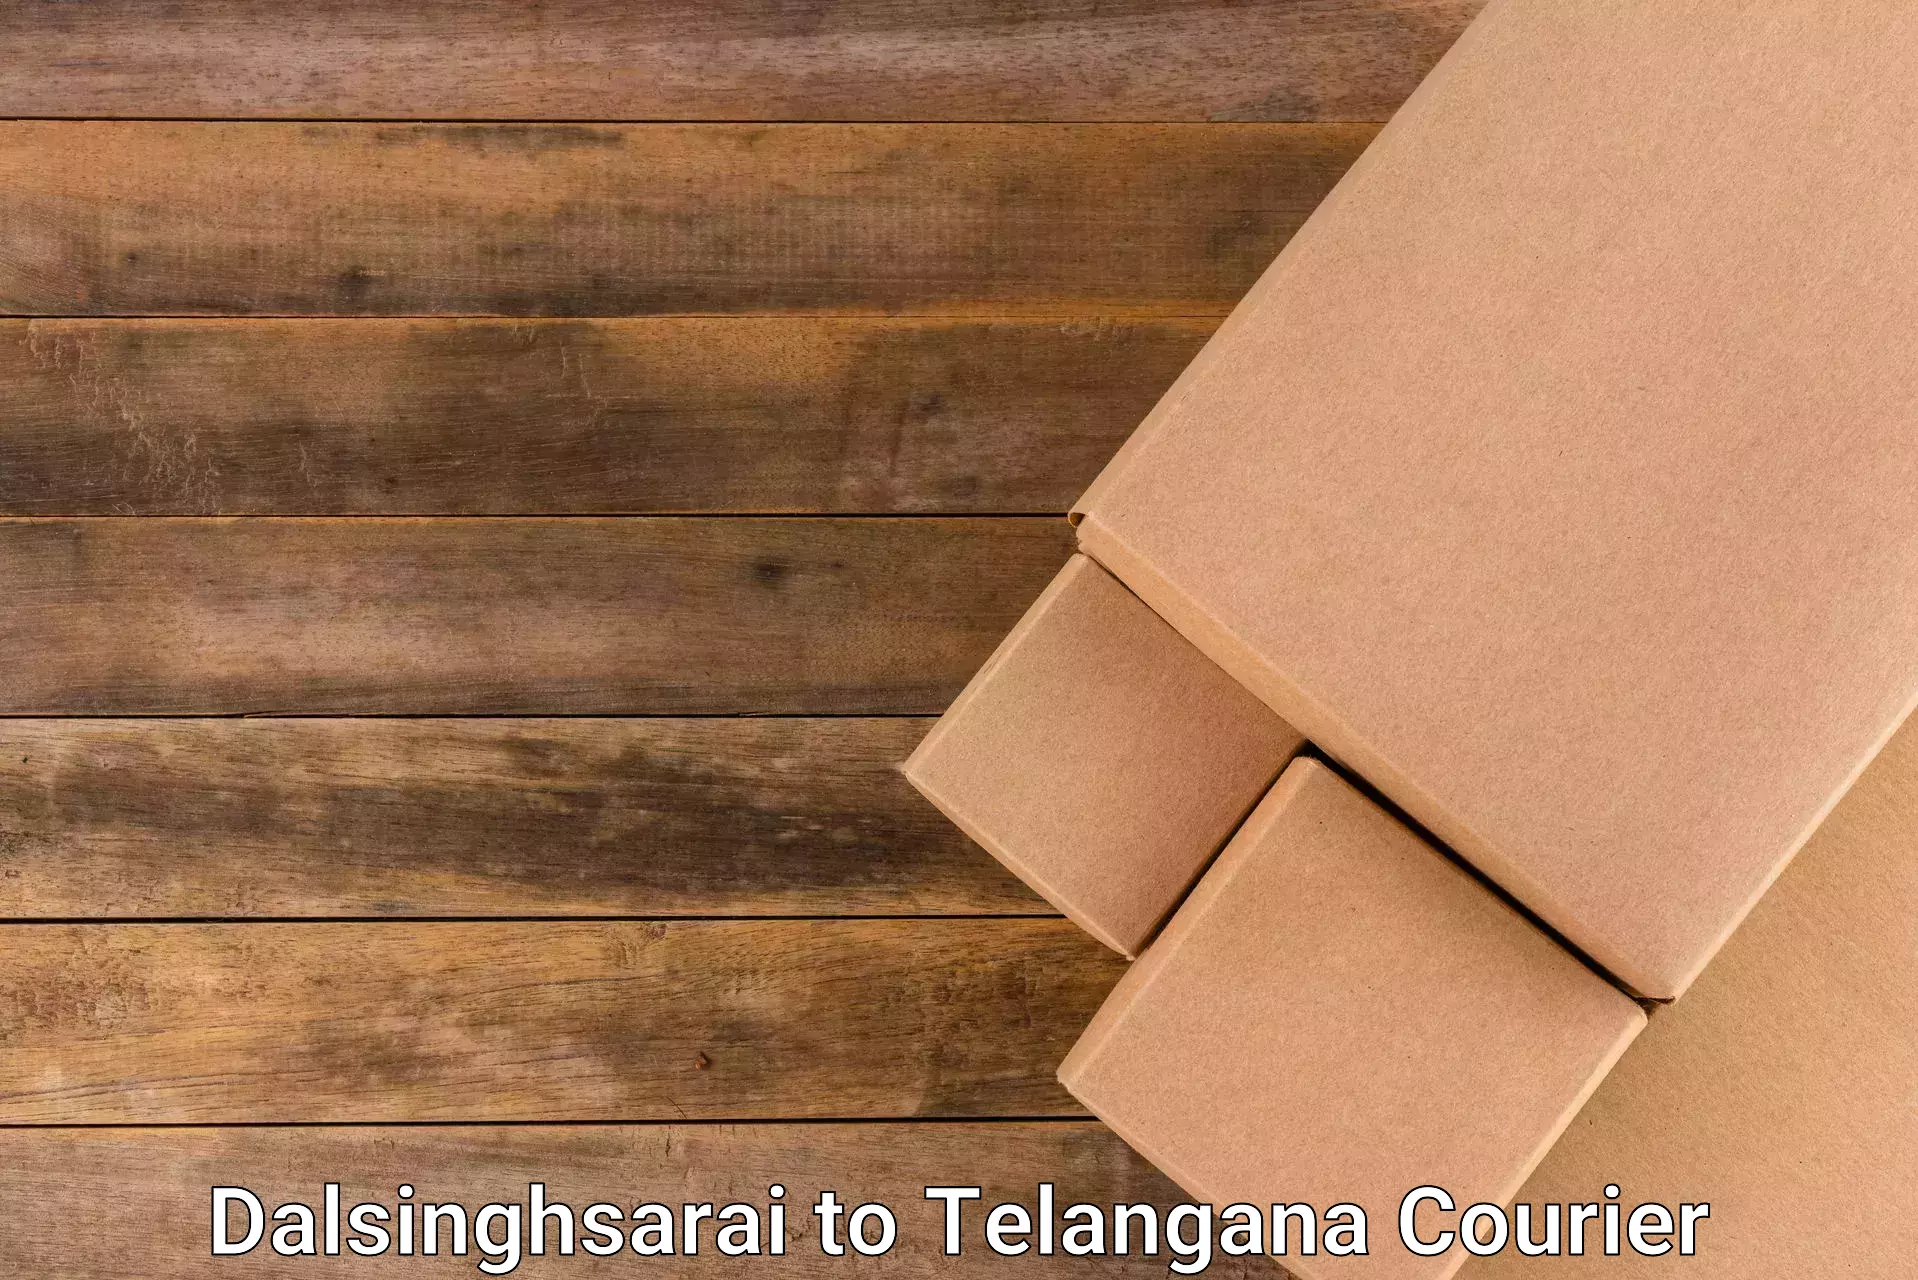 Large package courier Dalsinghsarai to Chandur